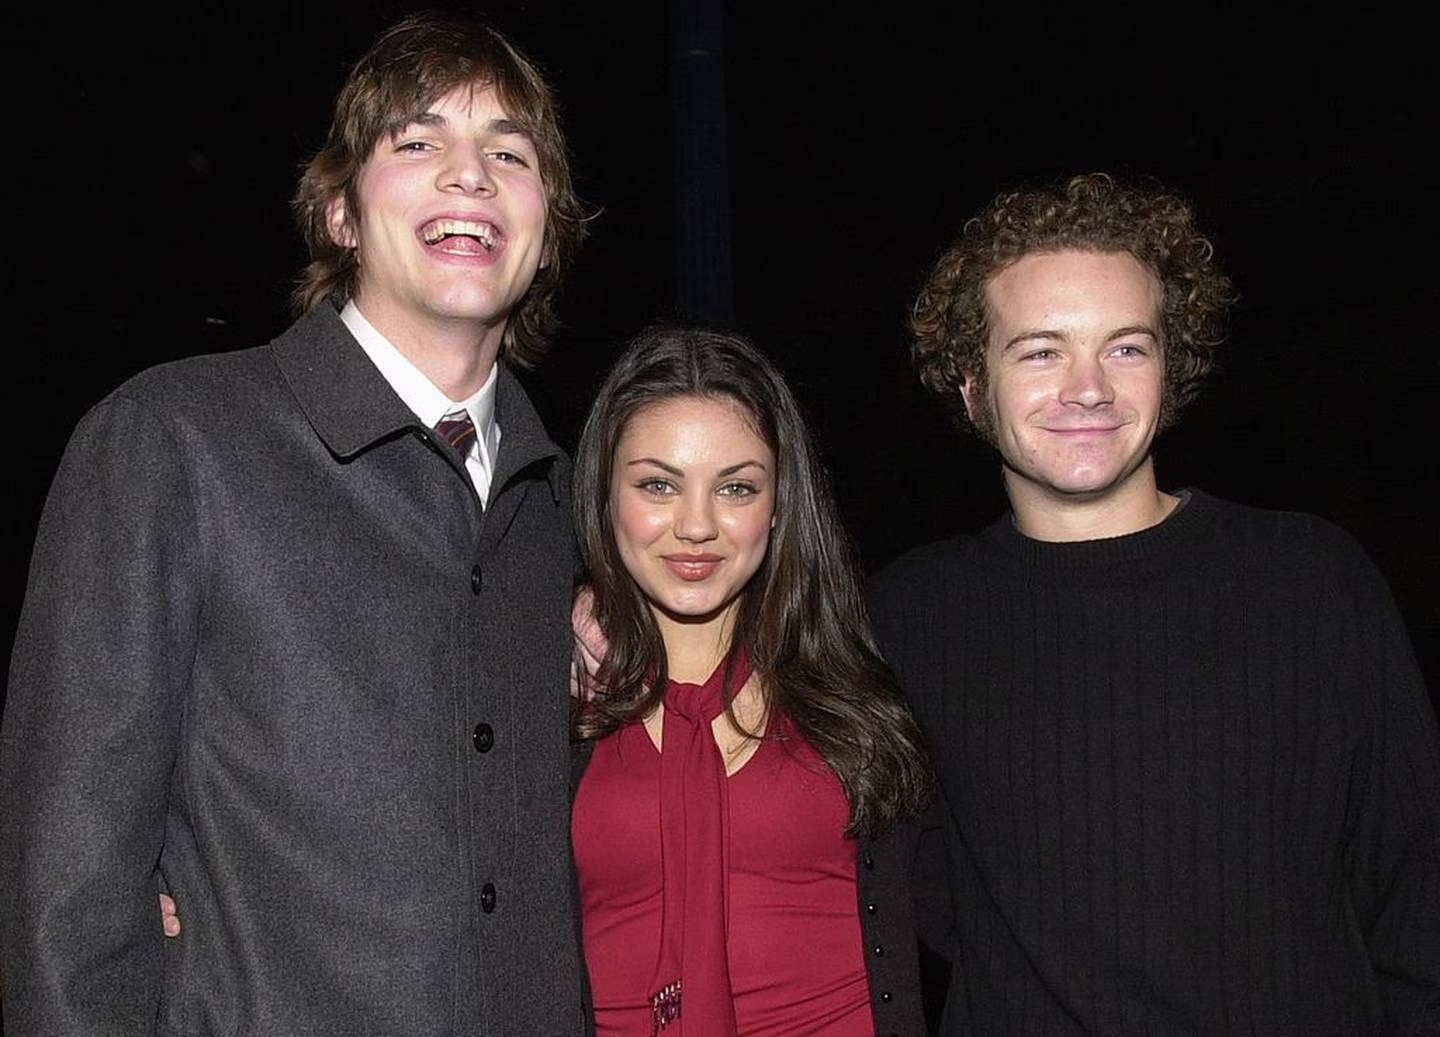 That 70's Show cast members Ashton Kutcher, Mila Kunis and Danny Masterson arrive at the premiere...